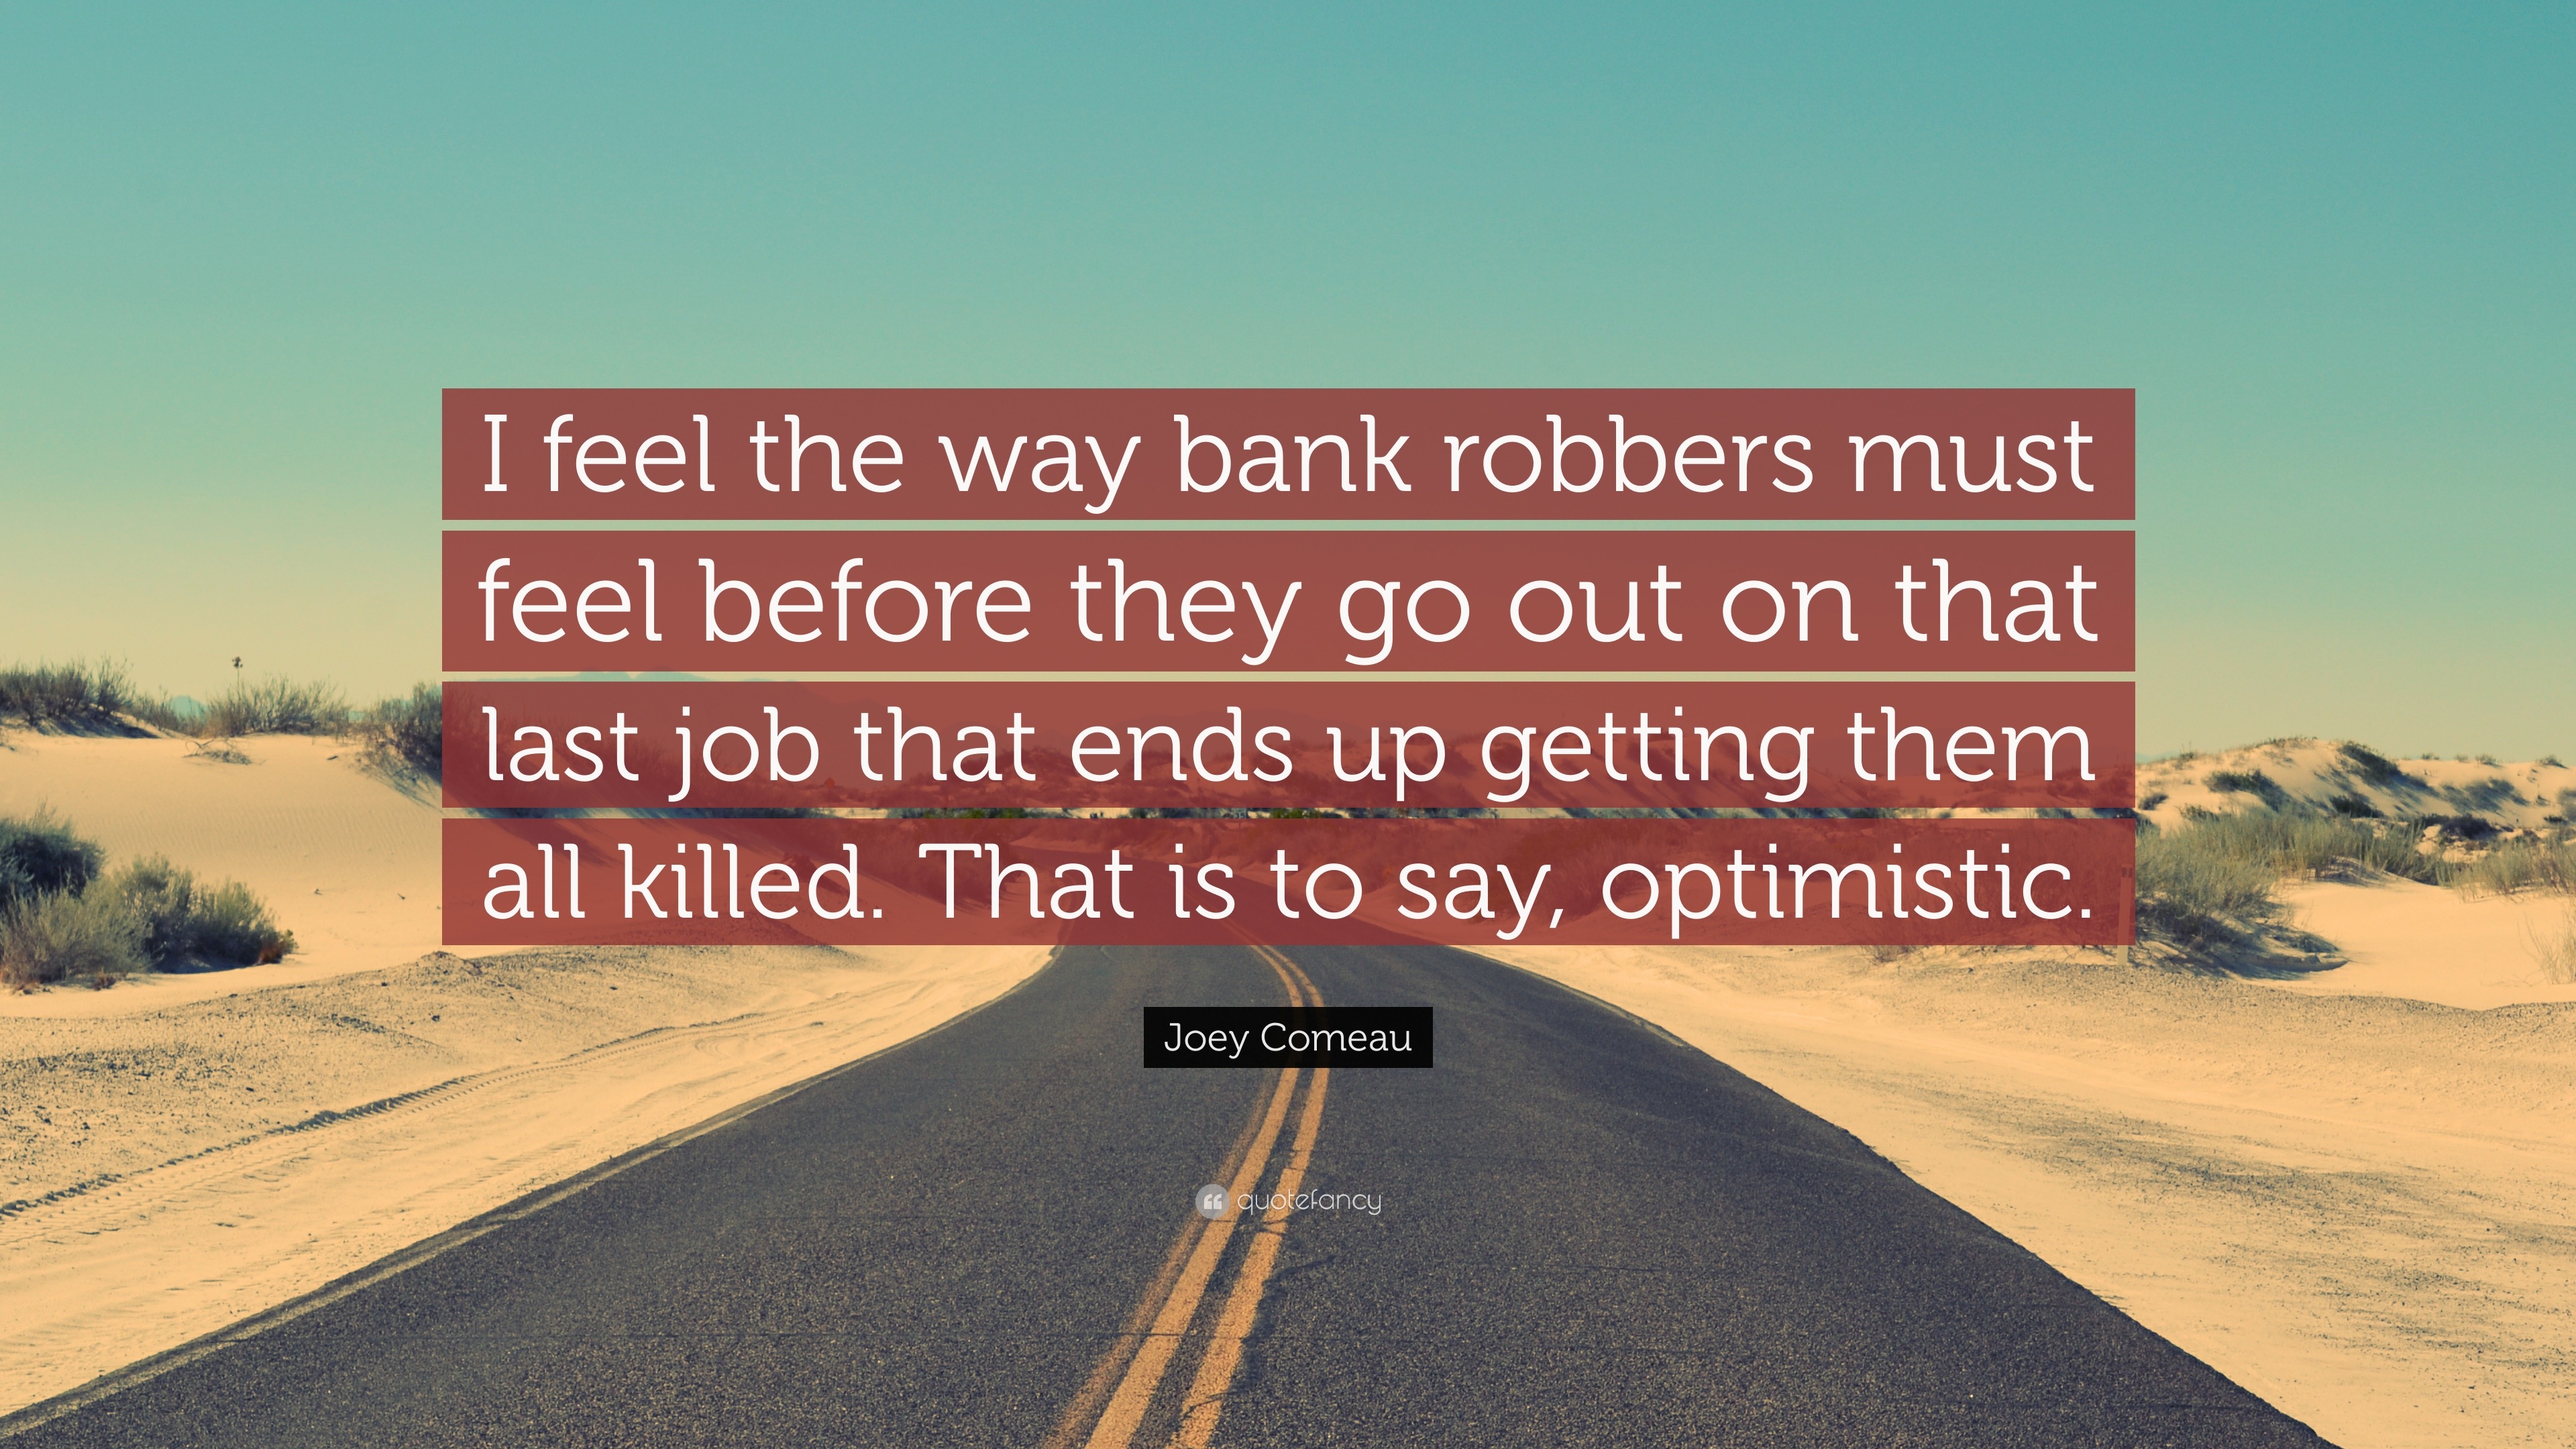 https://quotefancy.com/media/wallpaper/3840x2160/1165247-Joey-Comeau-Quote-I-feel-the-way-bank-robbers-must-feel-before.jpg